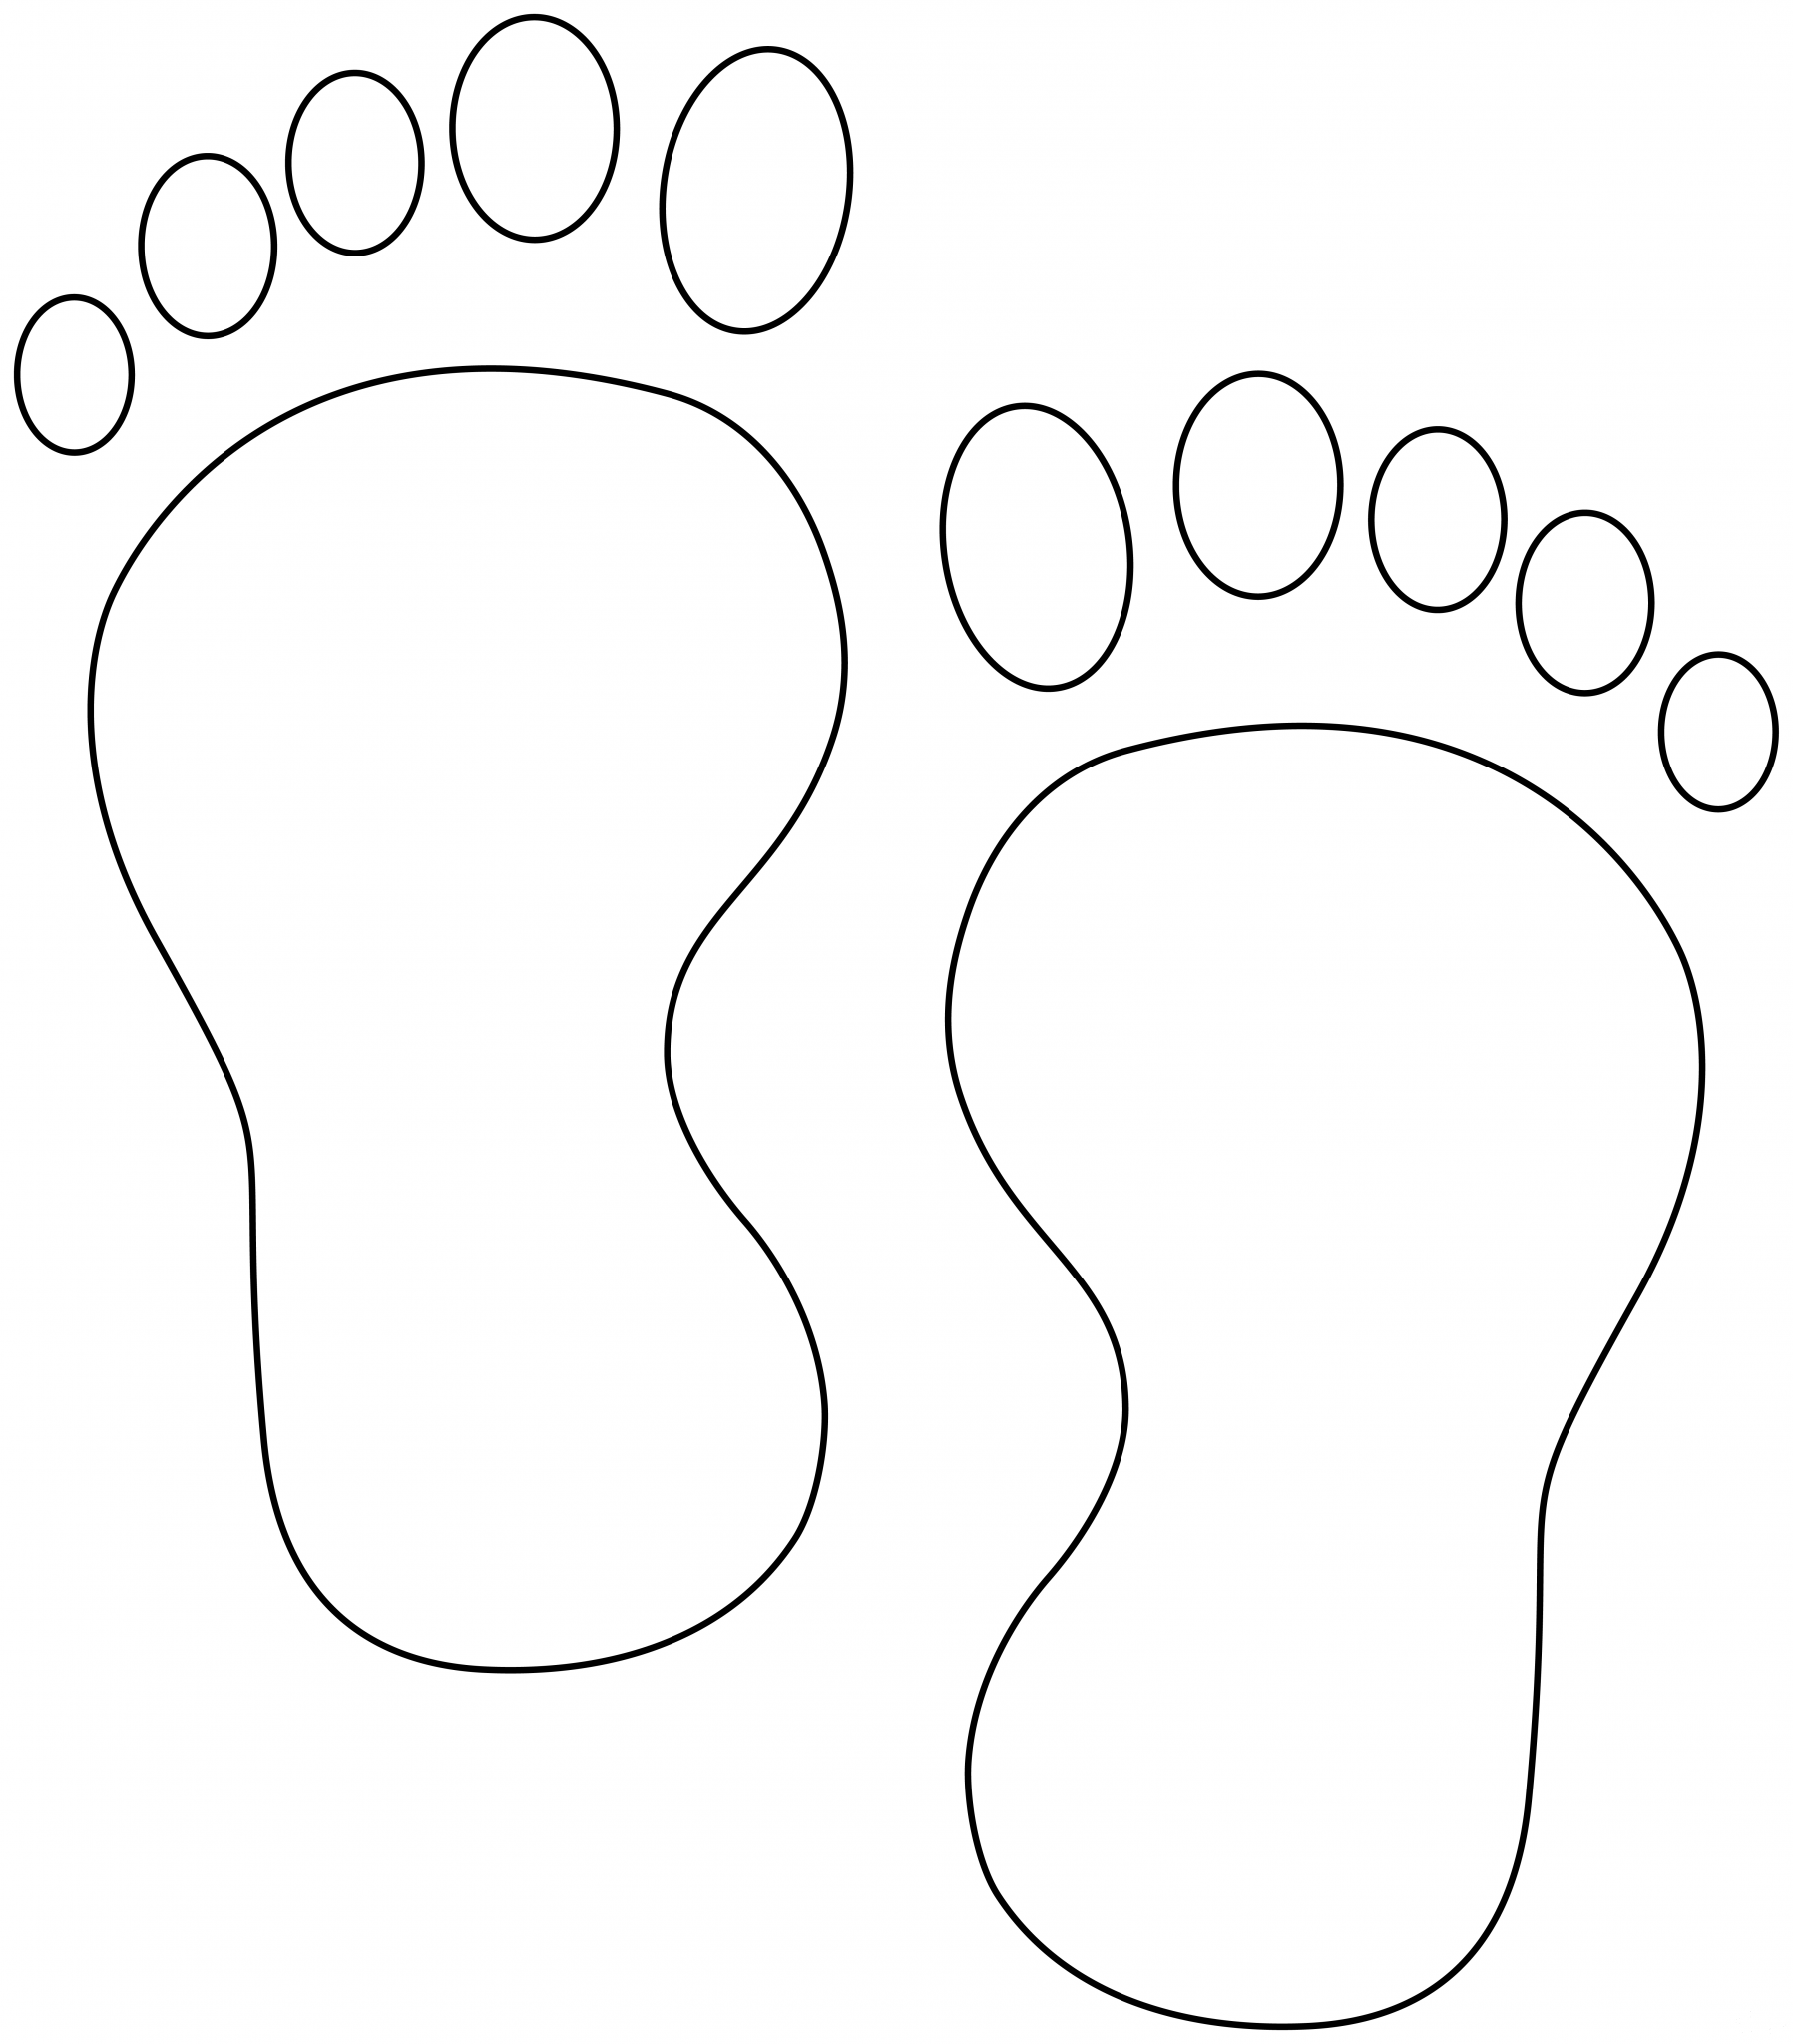 Footsteps coloring page - ColouringPages